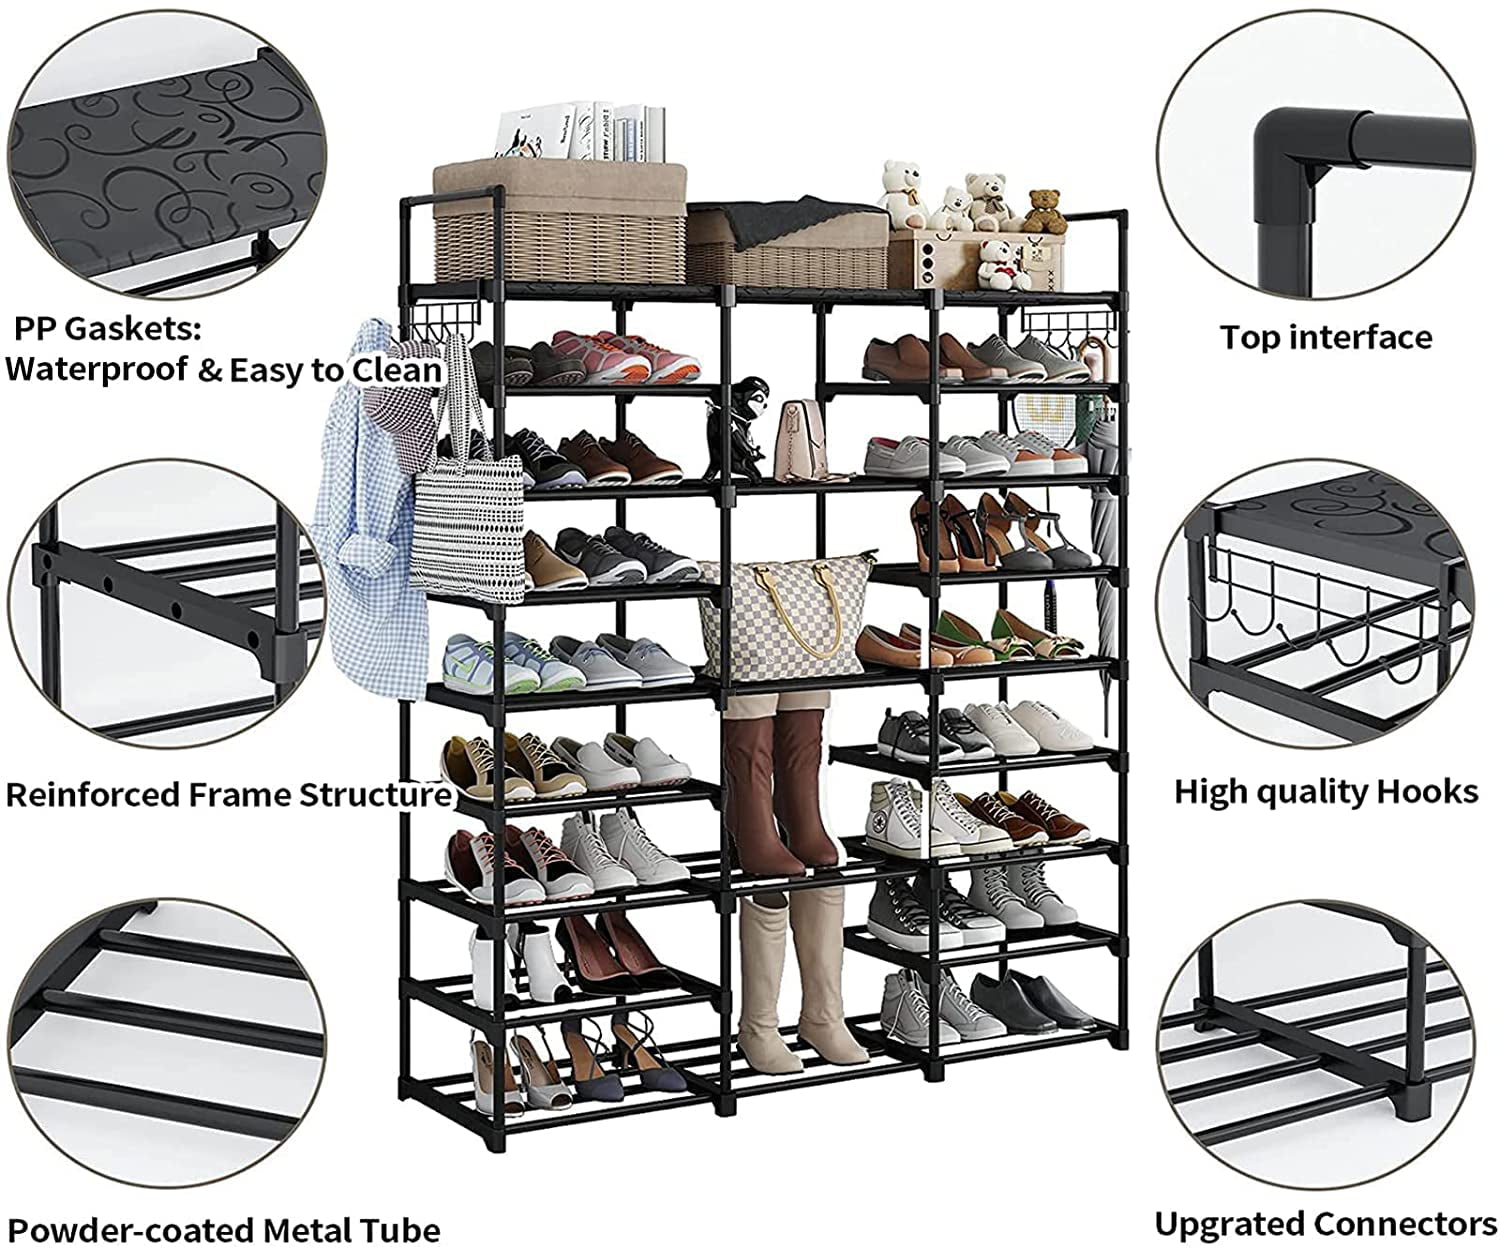 Finew 9 Tiers Shoe Rack Organizer for Entryway, Large Shoe Storage for  50-55 Pairs Boots, Non-Woven Fabric Shelf with Versatile Hooks and Wooden